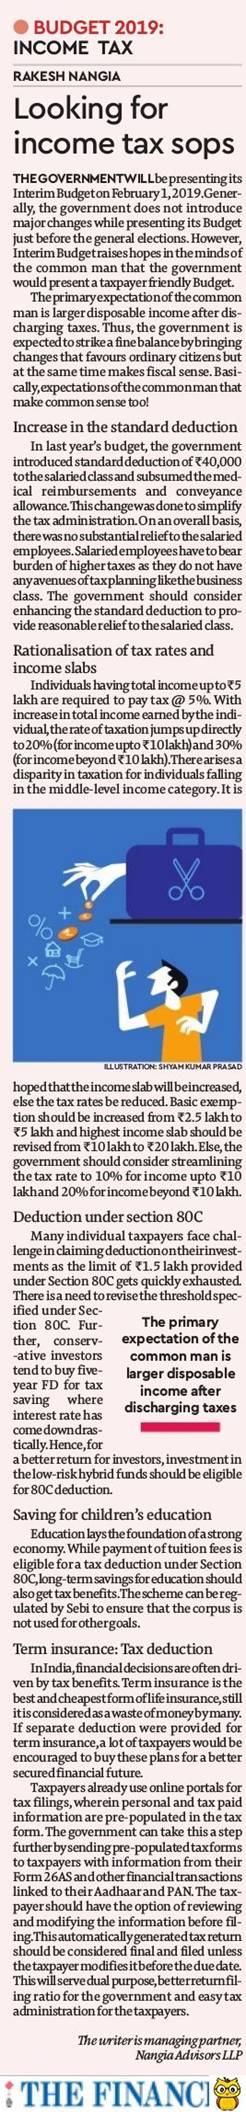 Income tax payers seeking more disposable income in hands